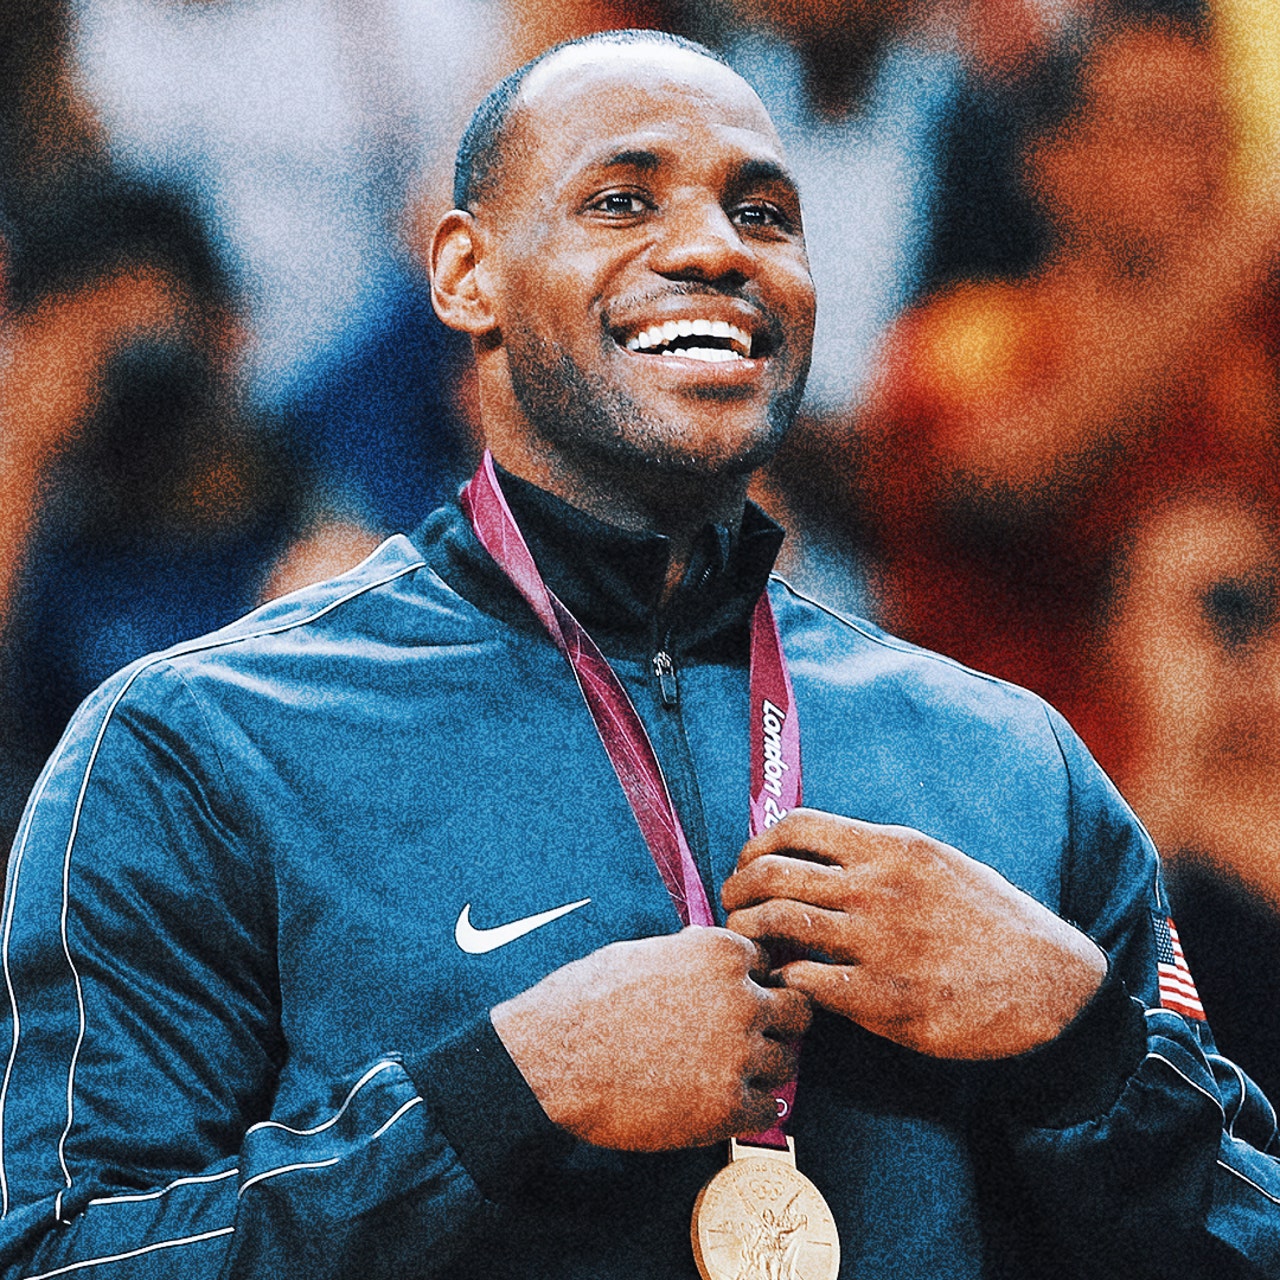 LeBron James ready to commit to Team USA for 2024 Olympics, but